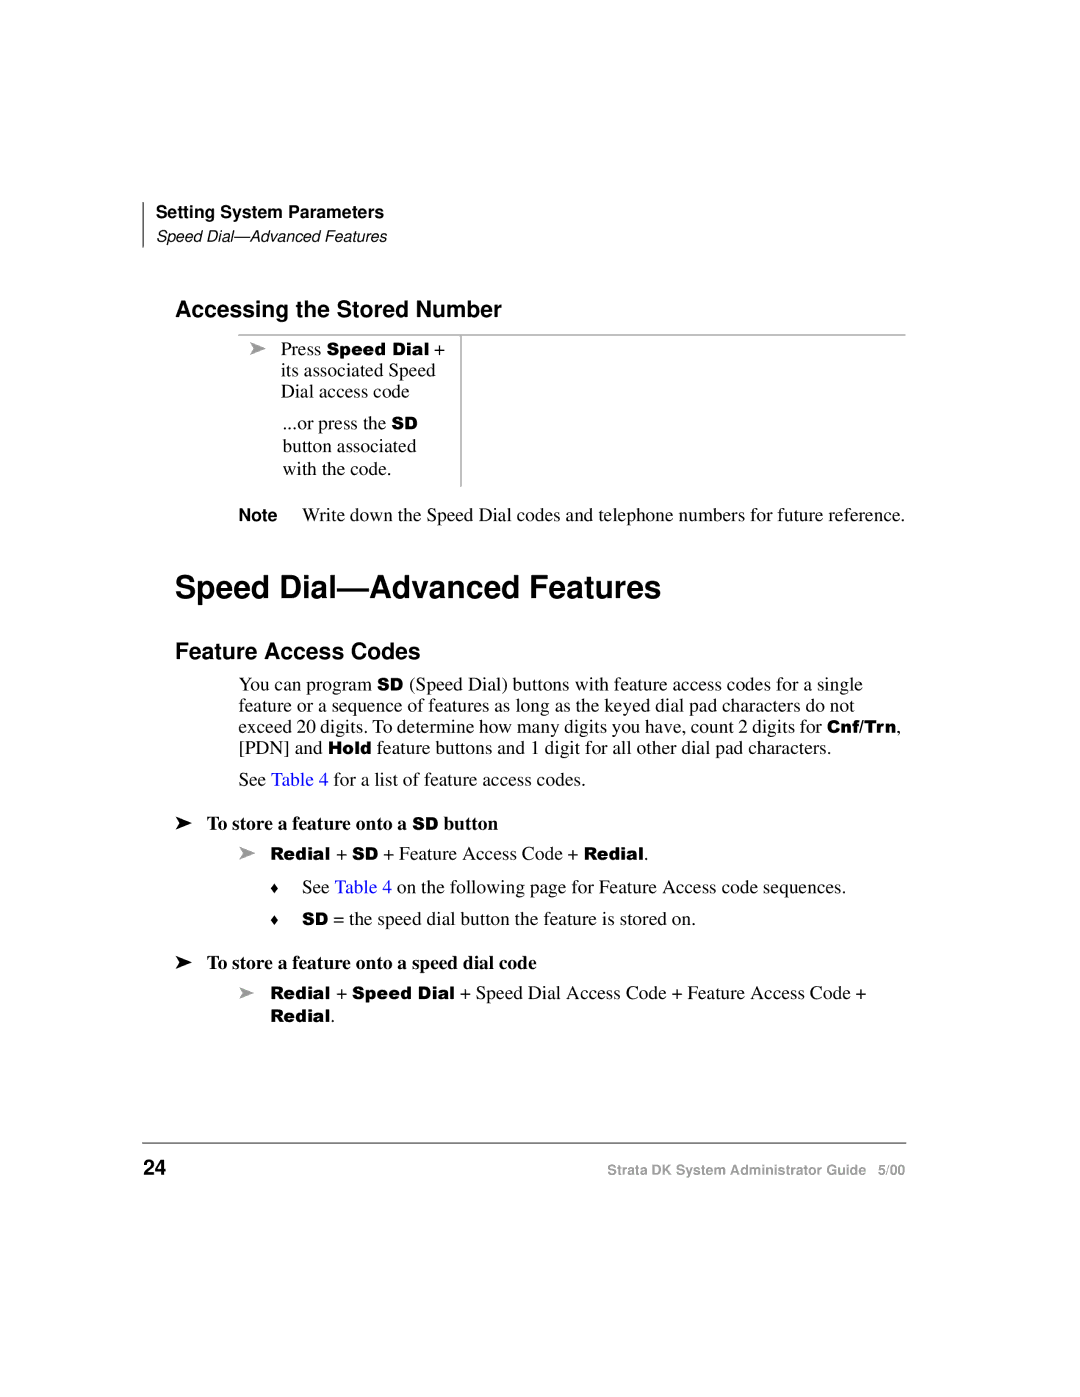 Toshiba DKA-AG-SYSTEMVD manual Speed Dial-Advanced Features, Accessing the Stored Number, Feature Access Codes 